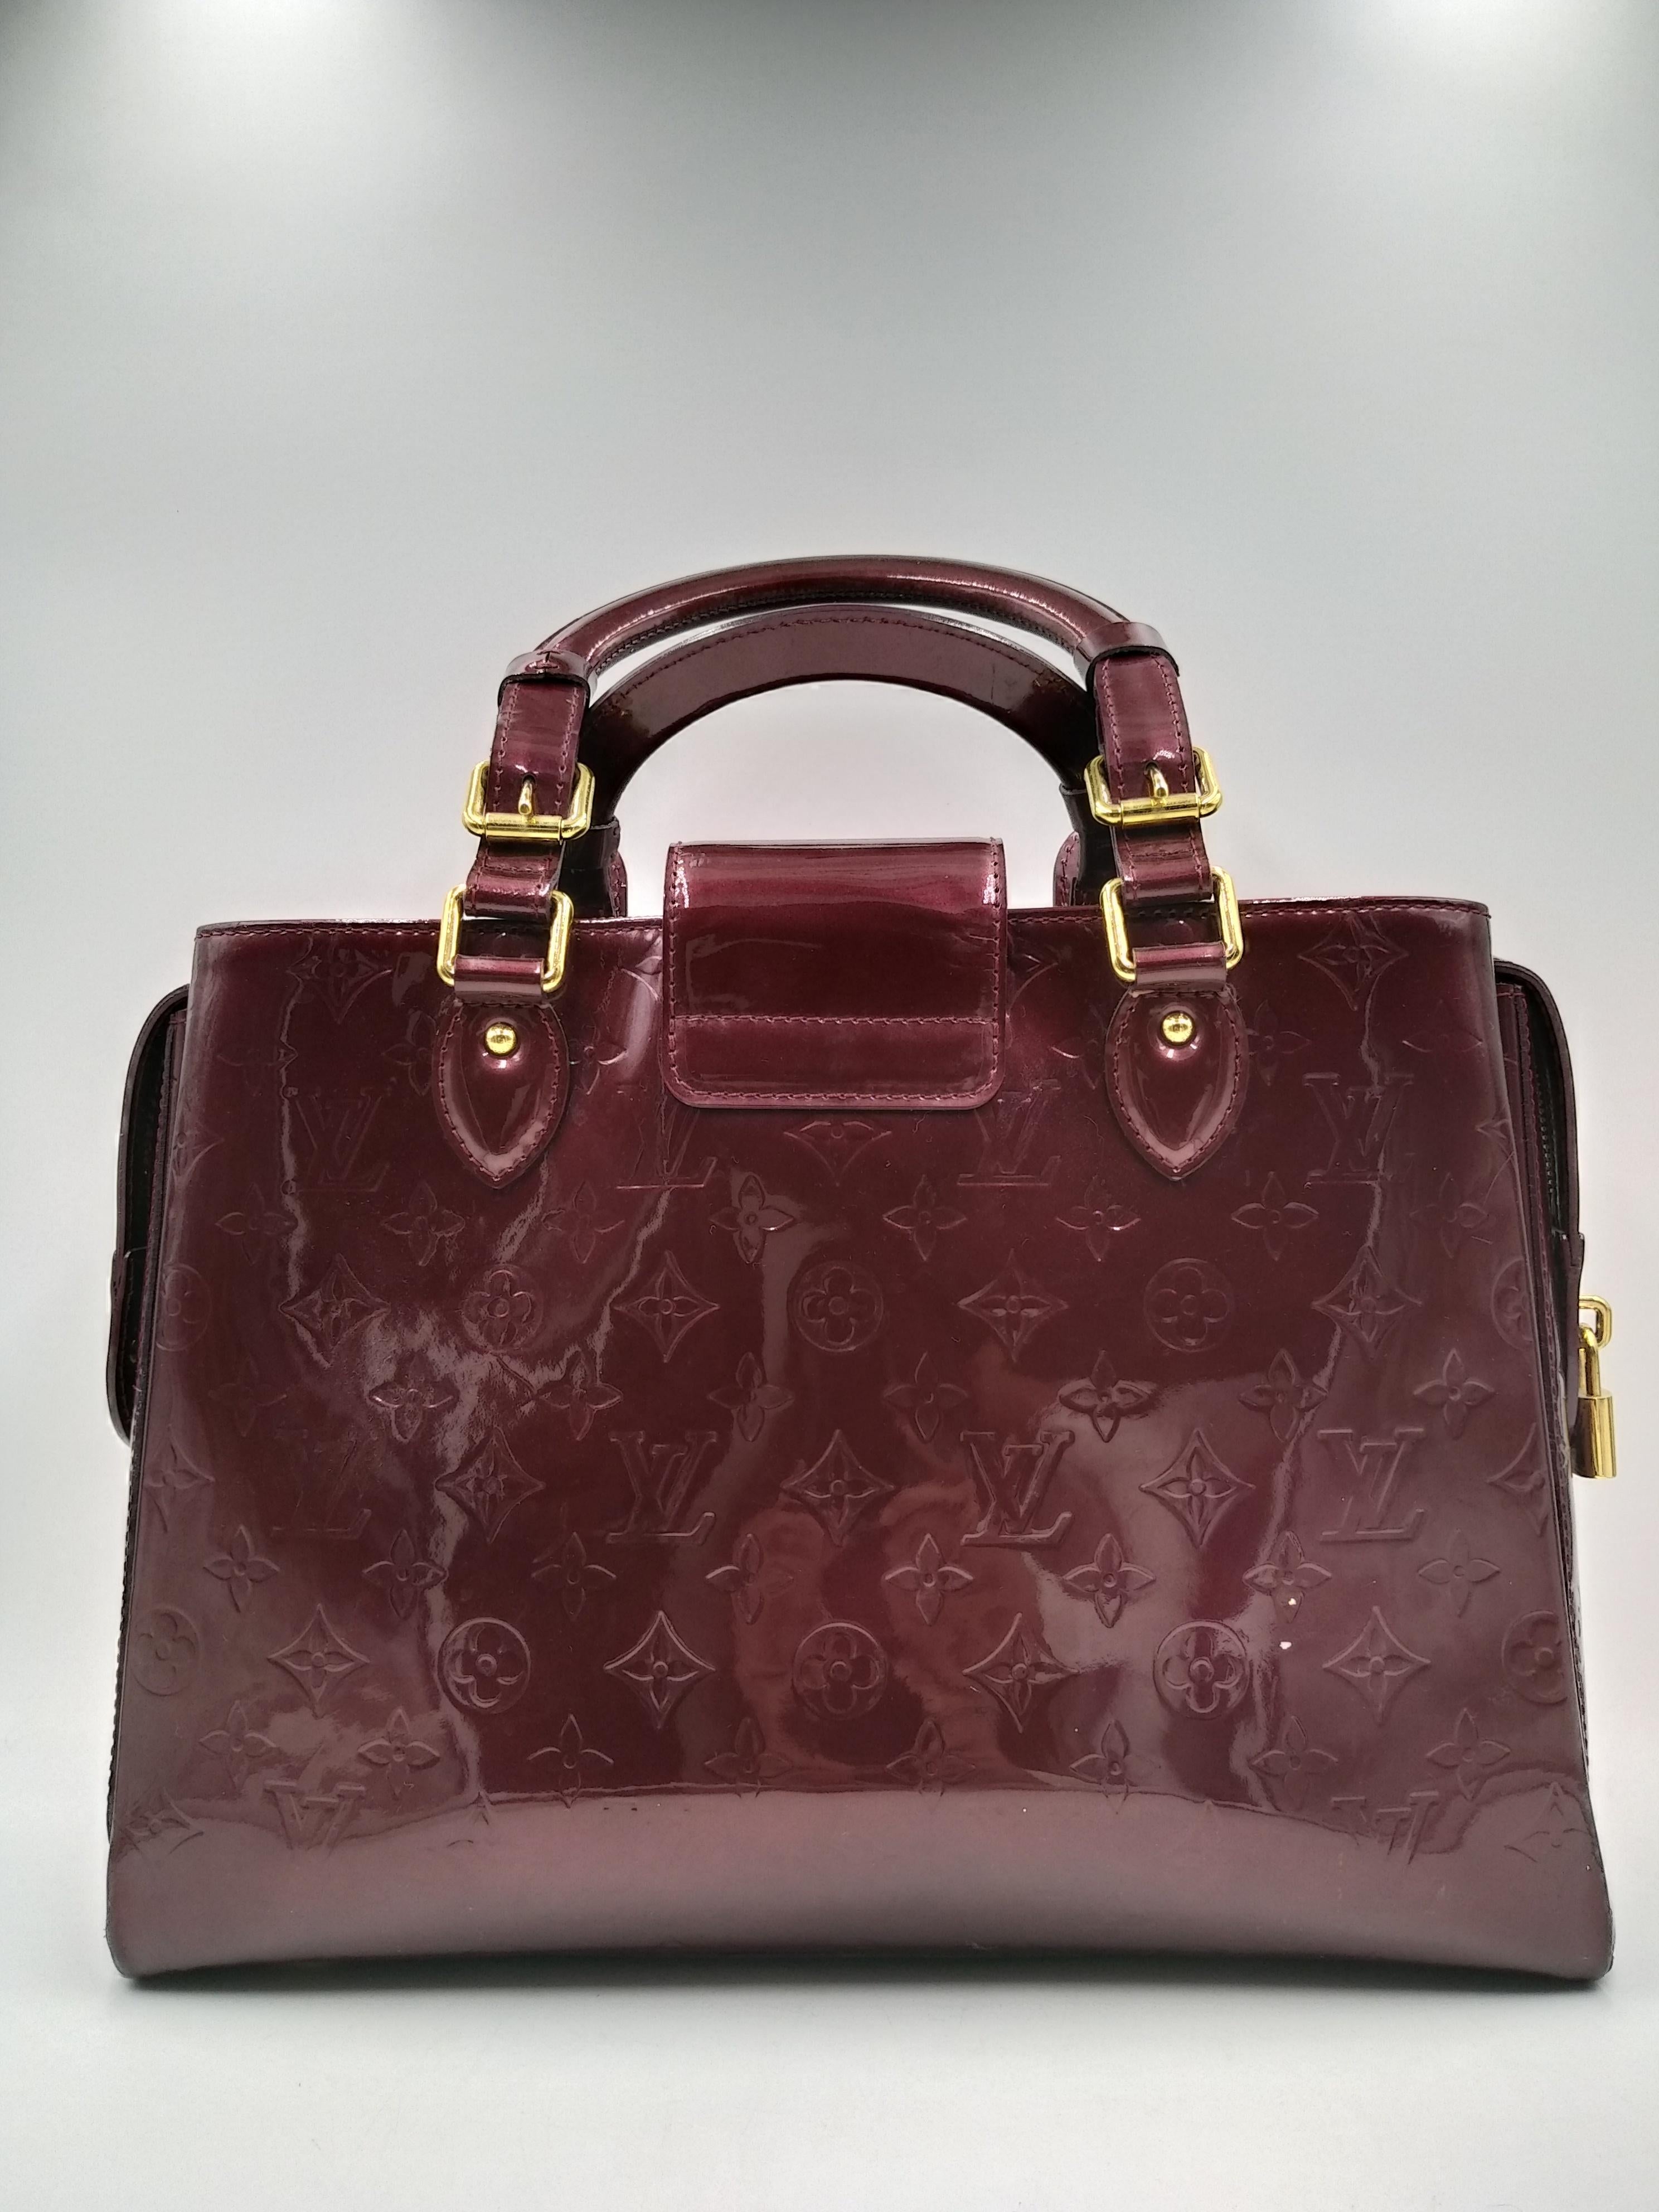 Louis Vuitton Monogram Amarante Vernis Melrose Avenue Bag 2010
-100% authentic LOUIS VUITTON 
- vernis patent leather in a deep amarante purple
- Double rolled handles
- brass hardware including a press lock on the smooth crossover strap, and a